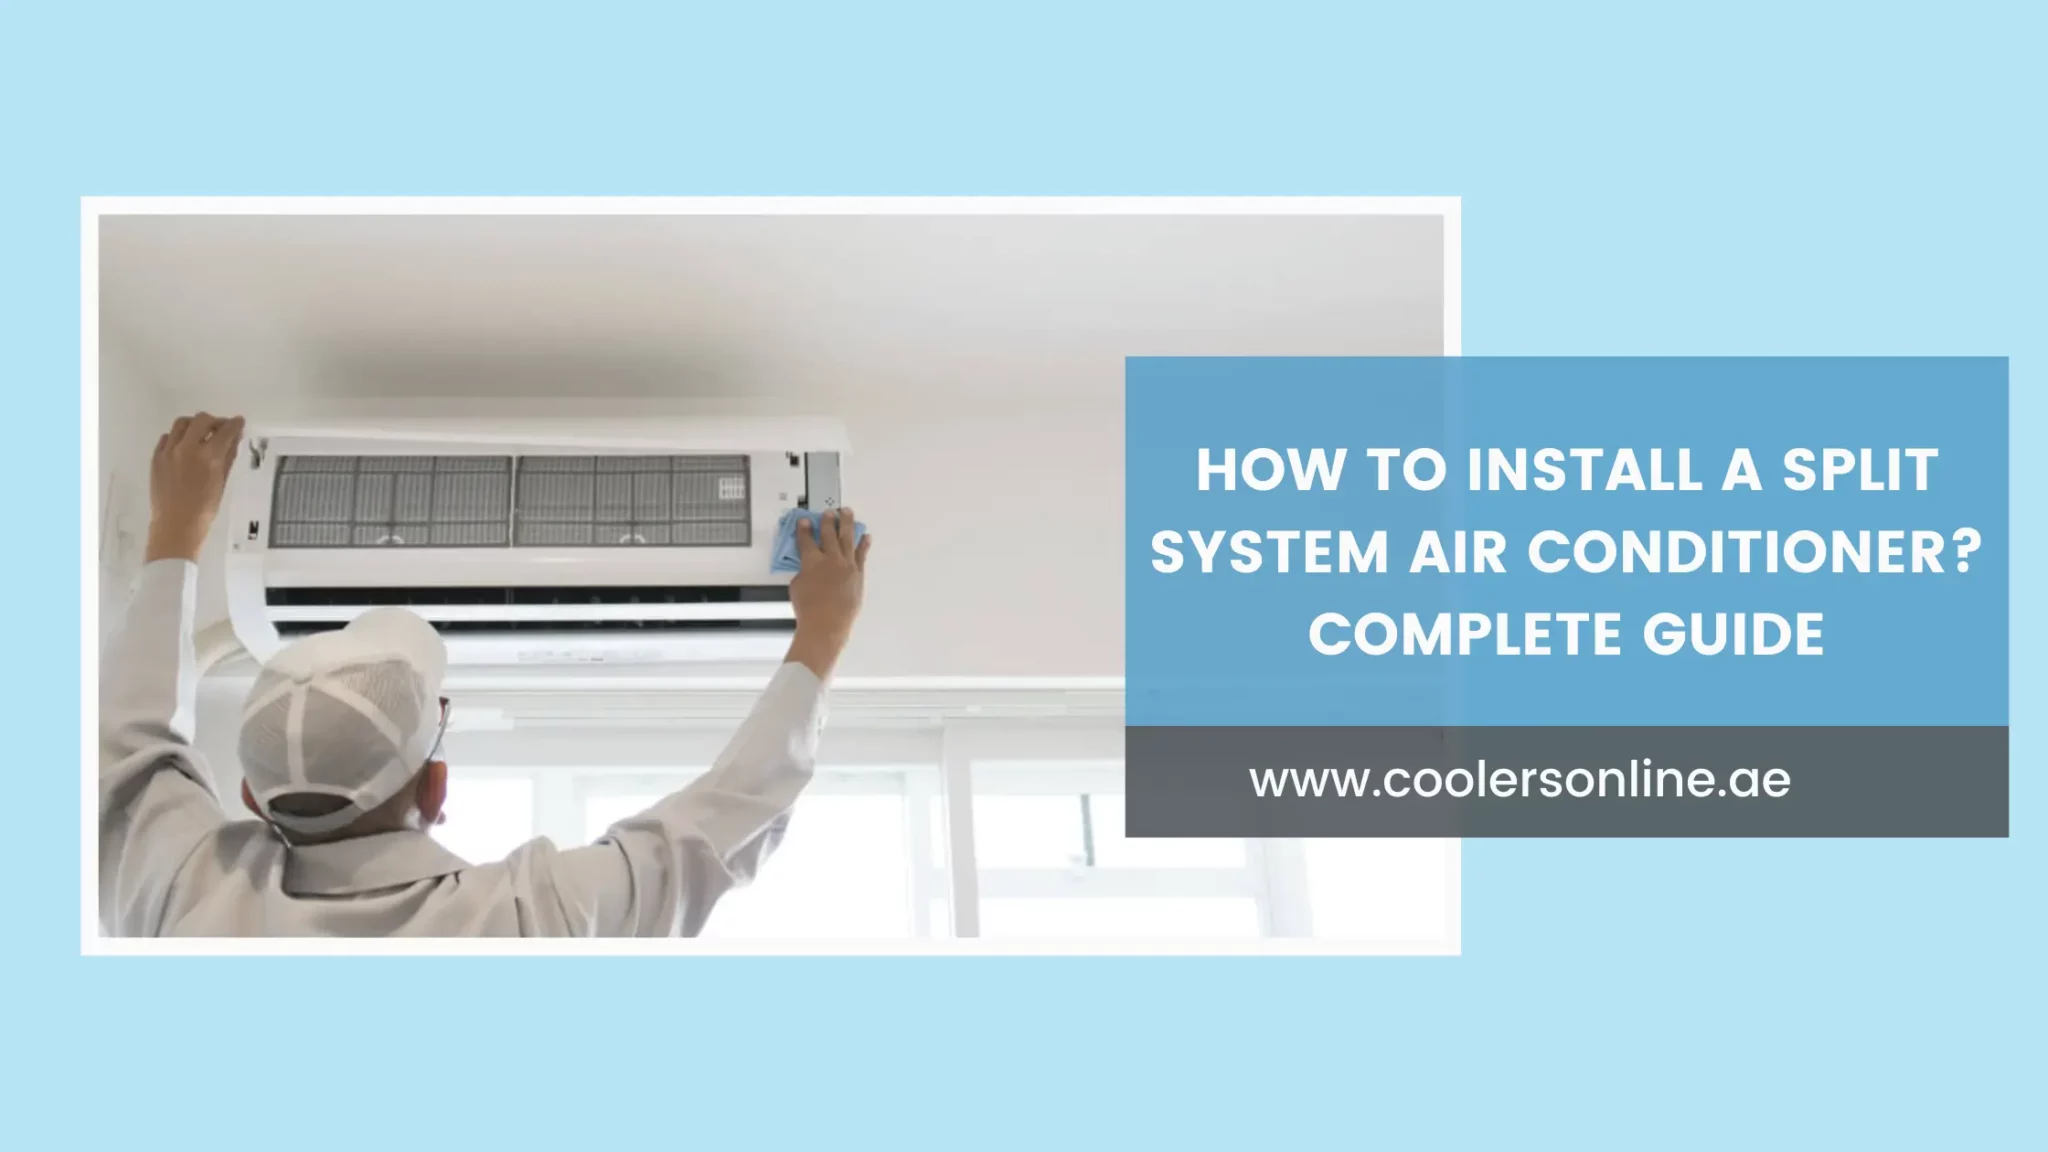 How To Install A Split System Air Conditioner? Complete Guide